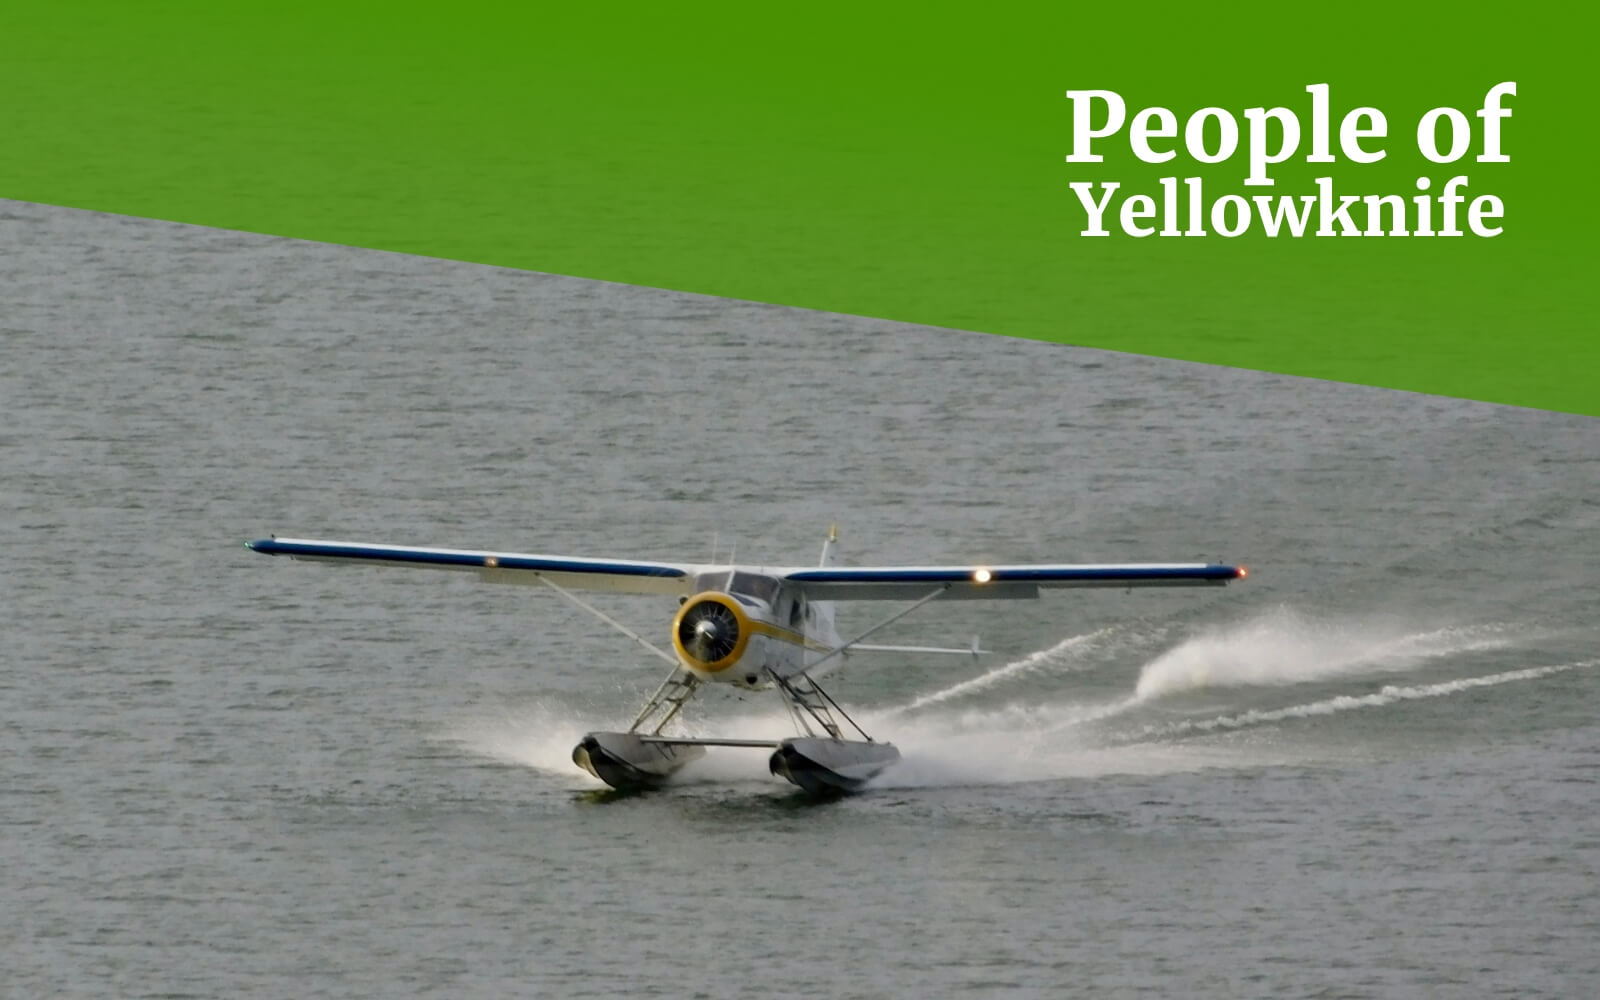 A float plane lands on the Great Slave Lake in Yellowknife, Canada.